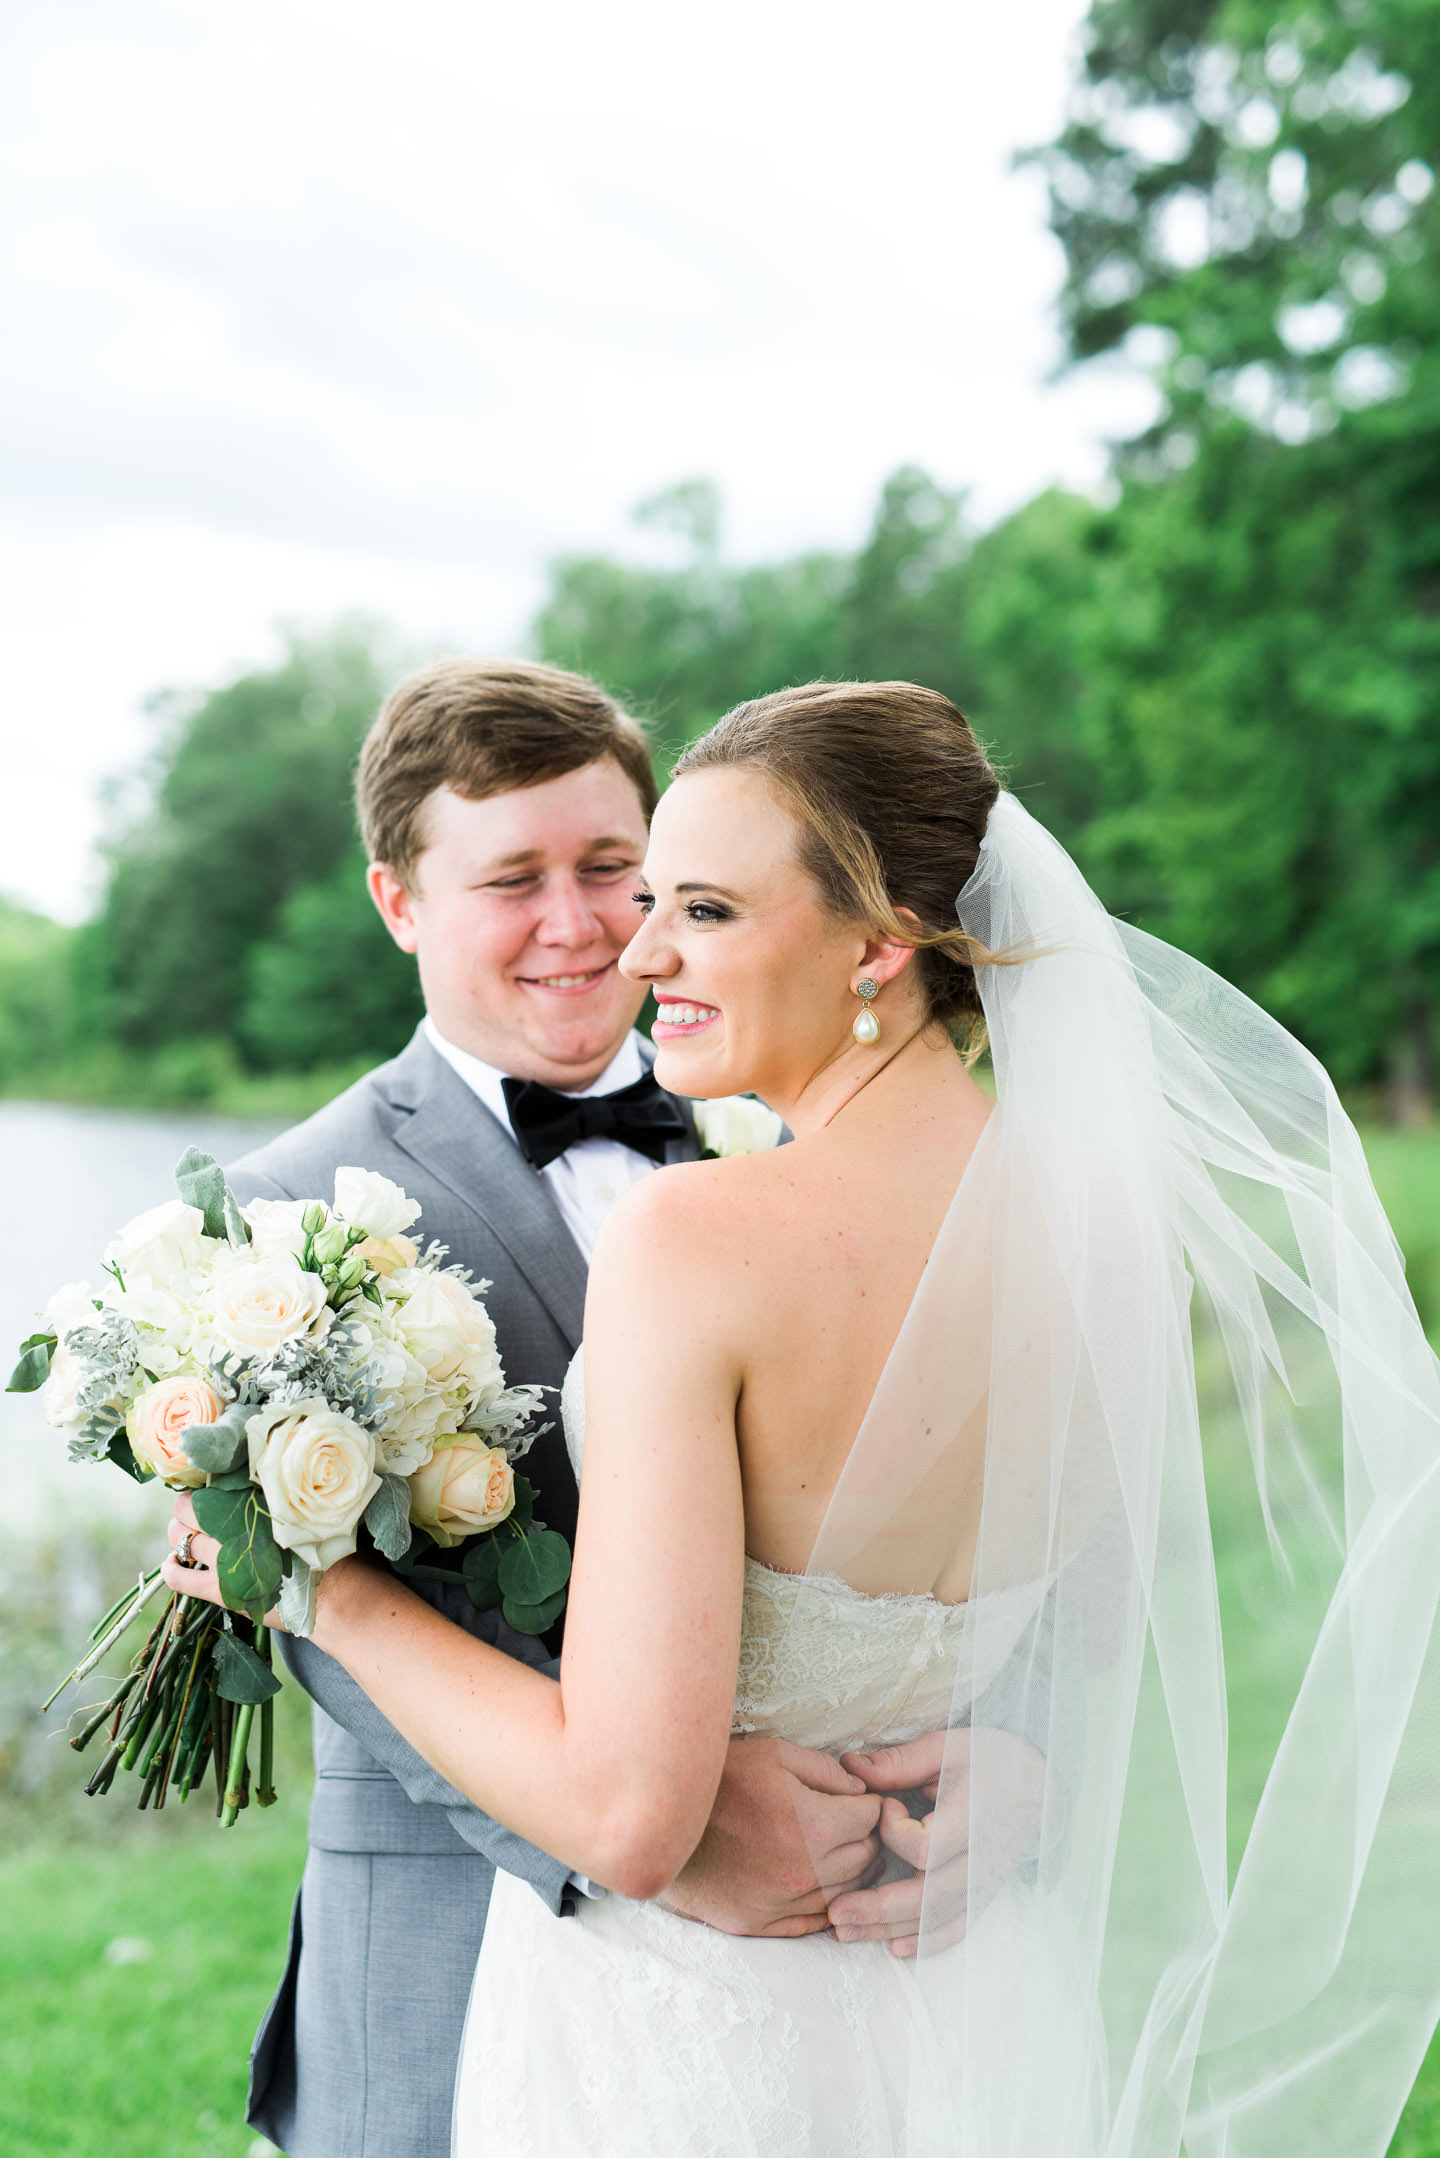 Joyful portrait of southern bride smiles while groom looks at her before their outdoor Mississippi wedding